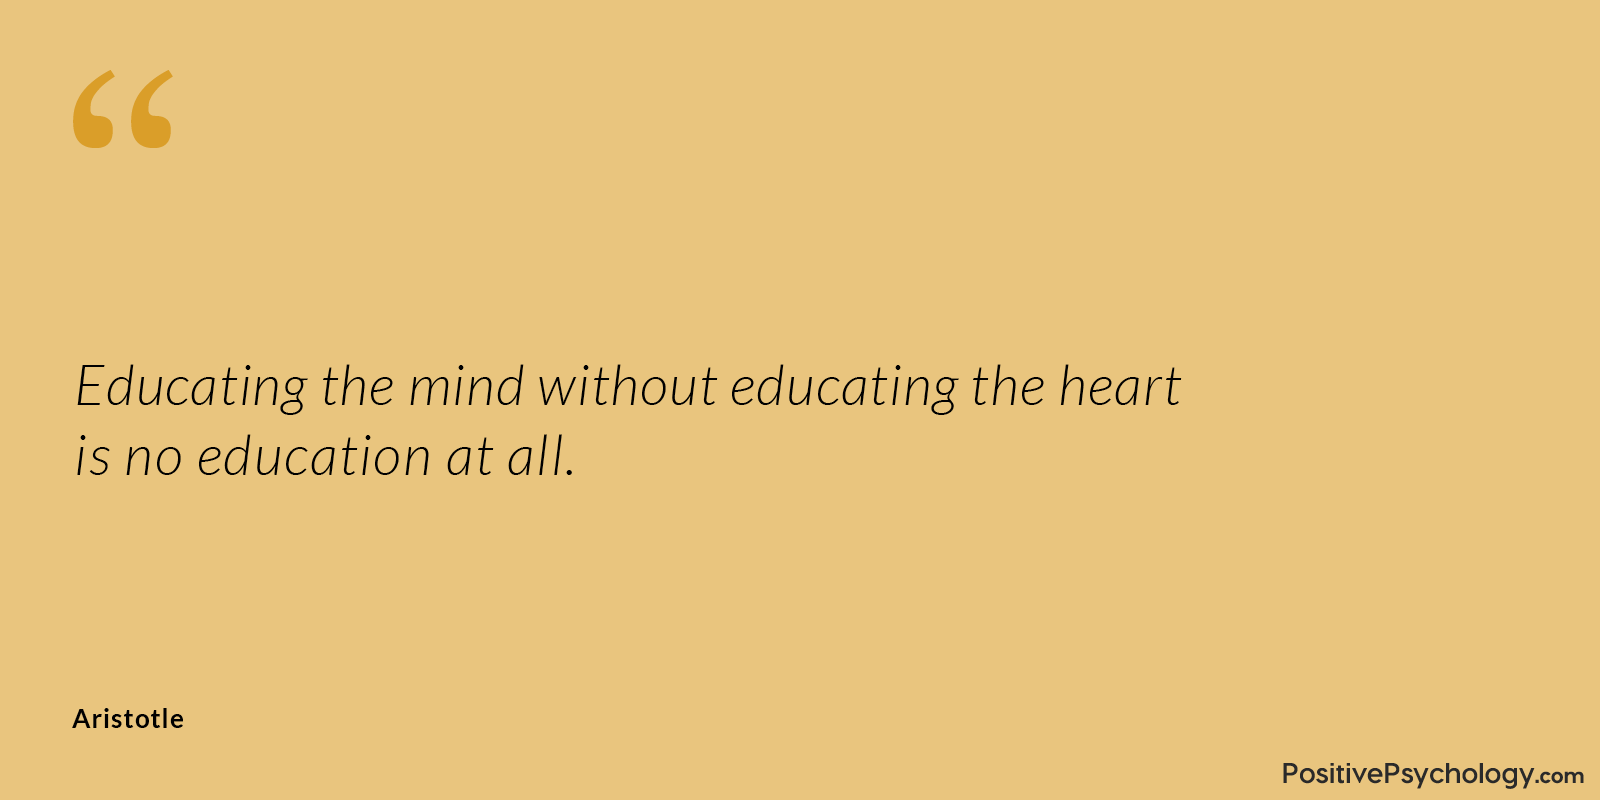 Educating the heart